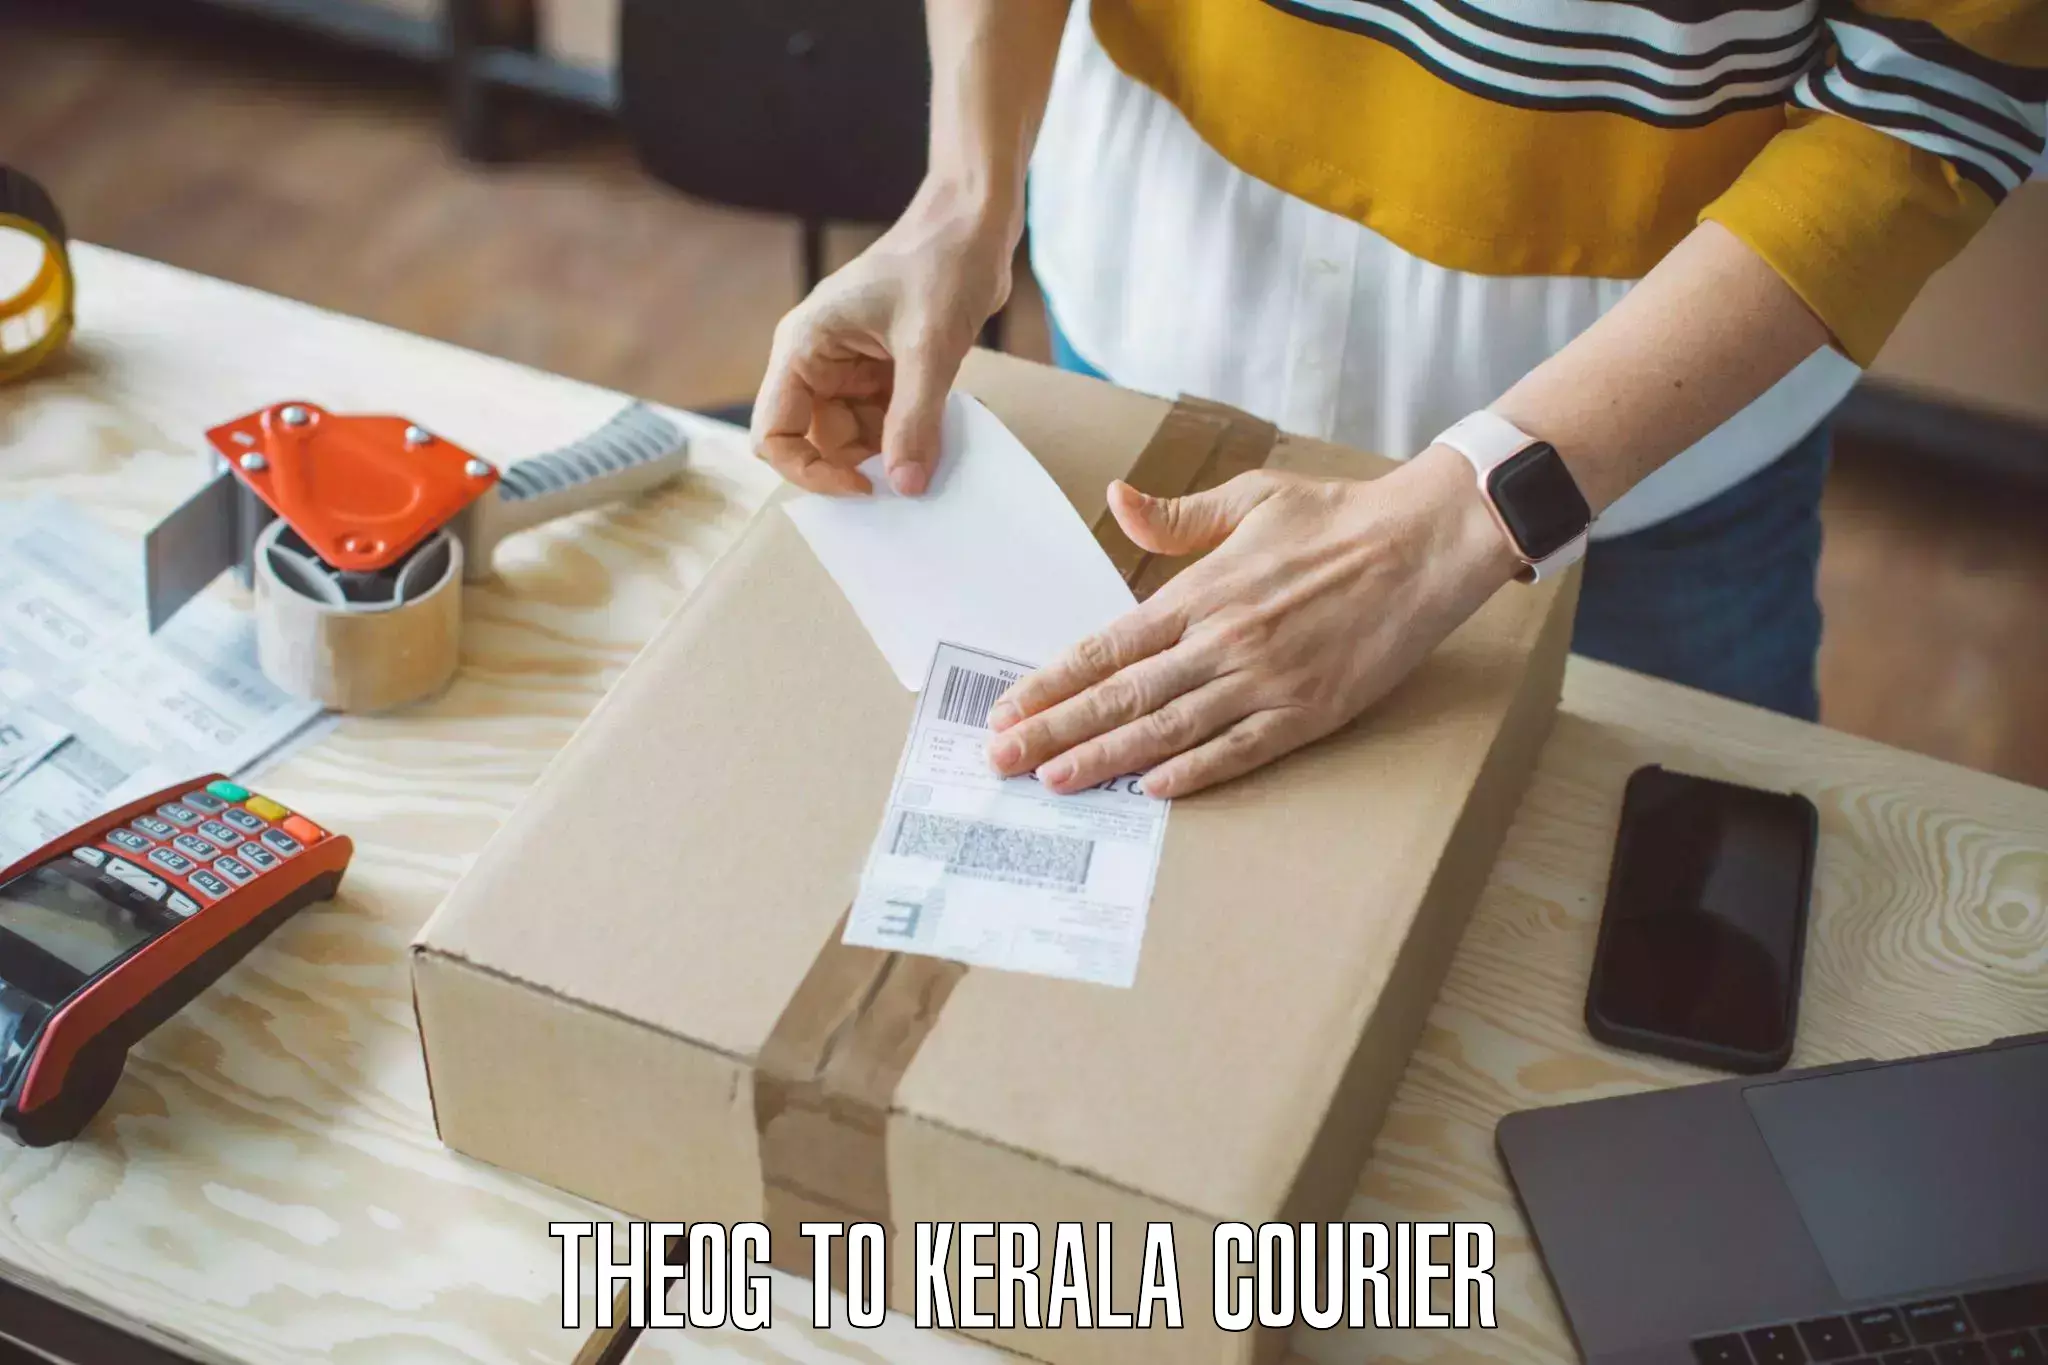 Furniture delivery service Theog to Kerala